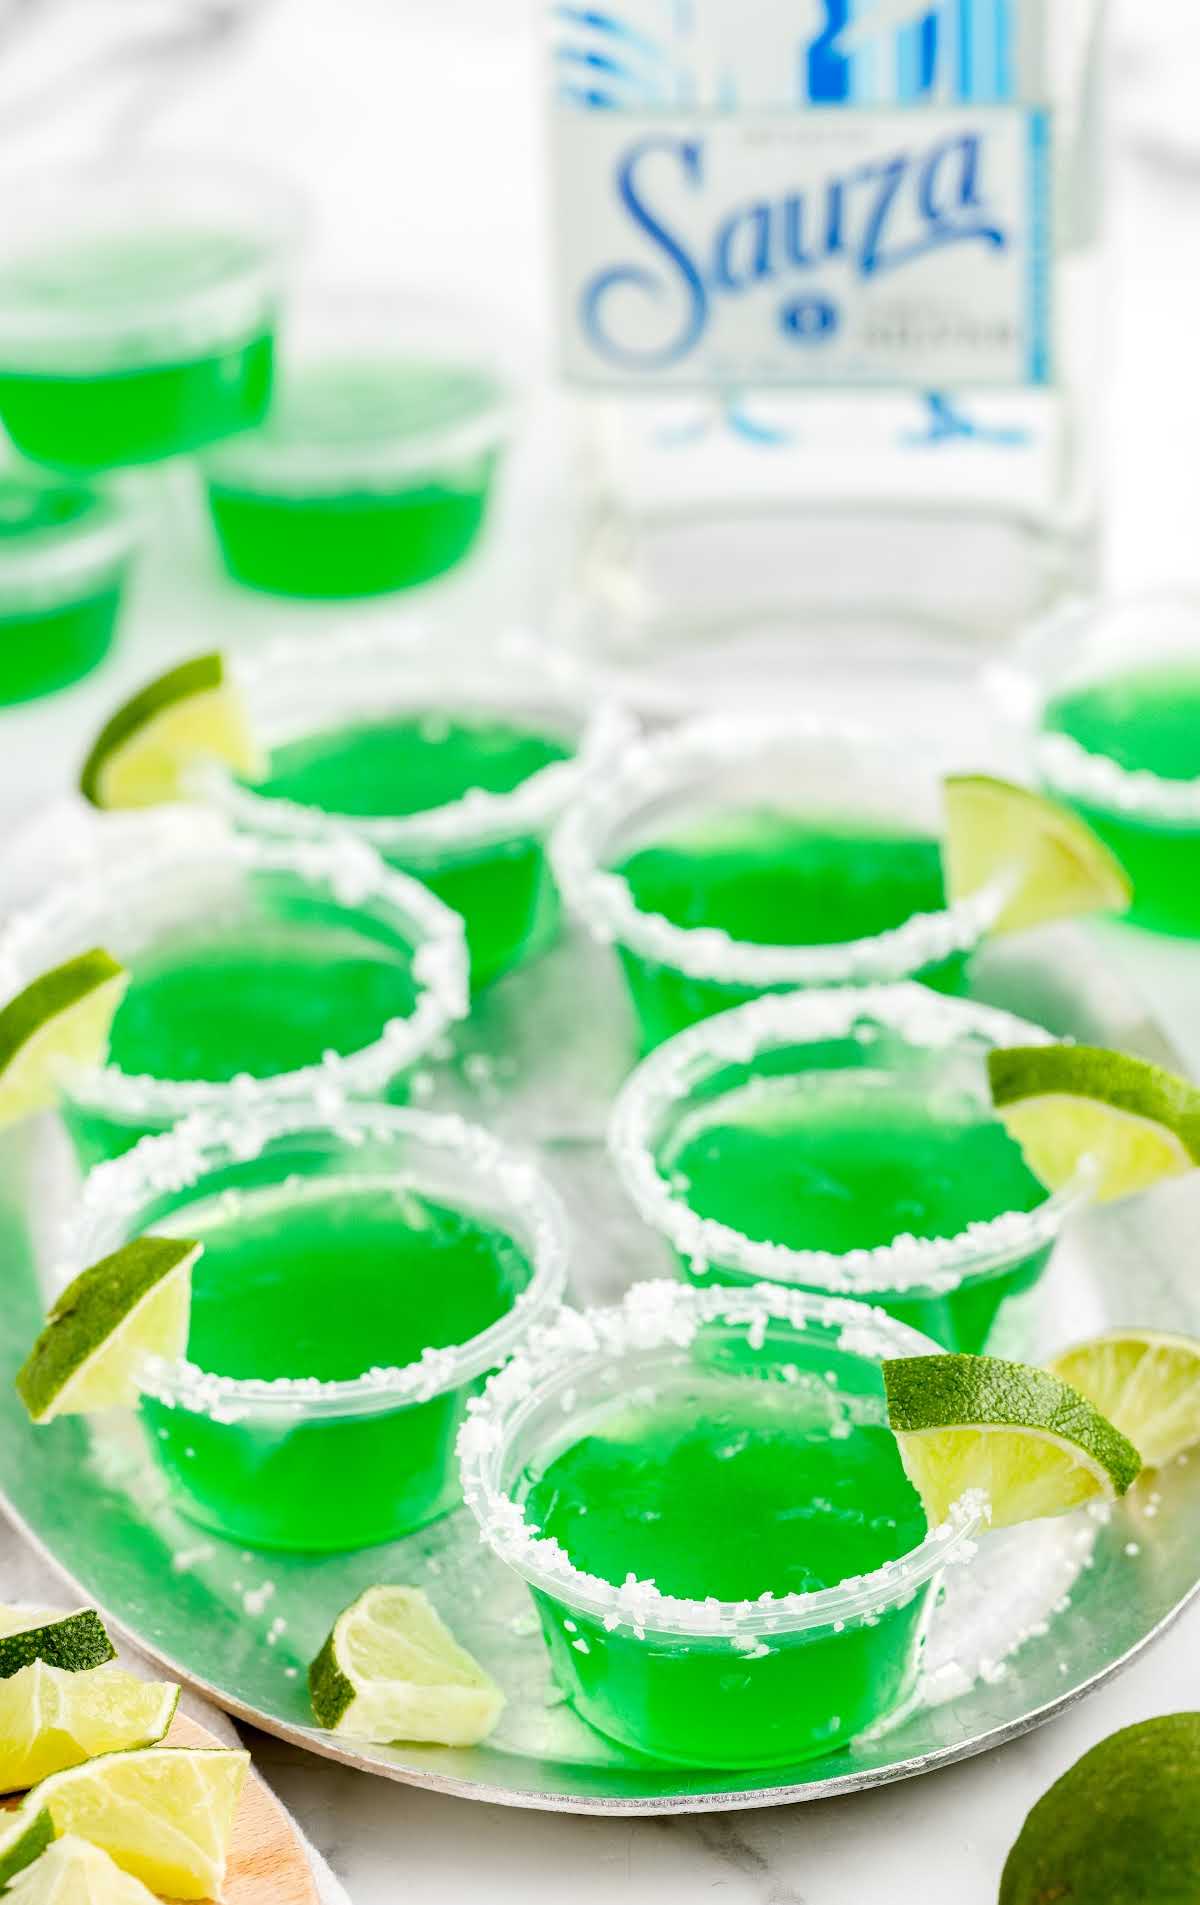 Tequila and Jello shot